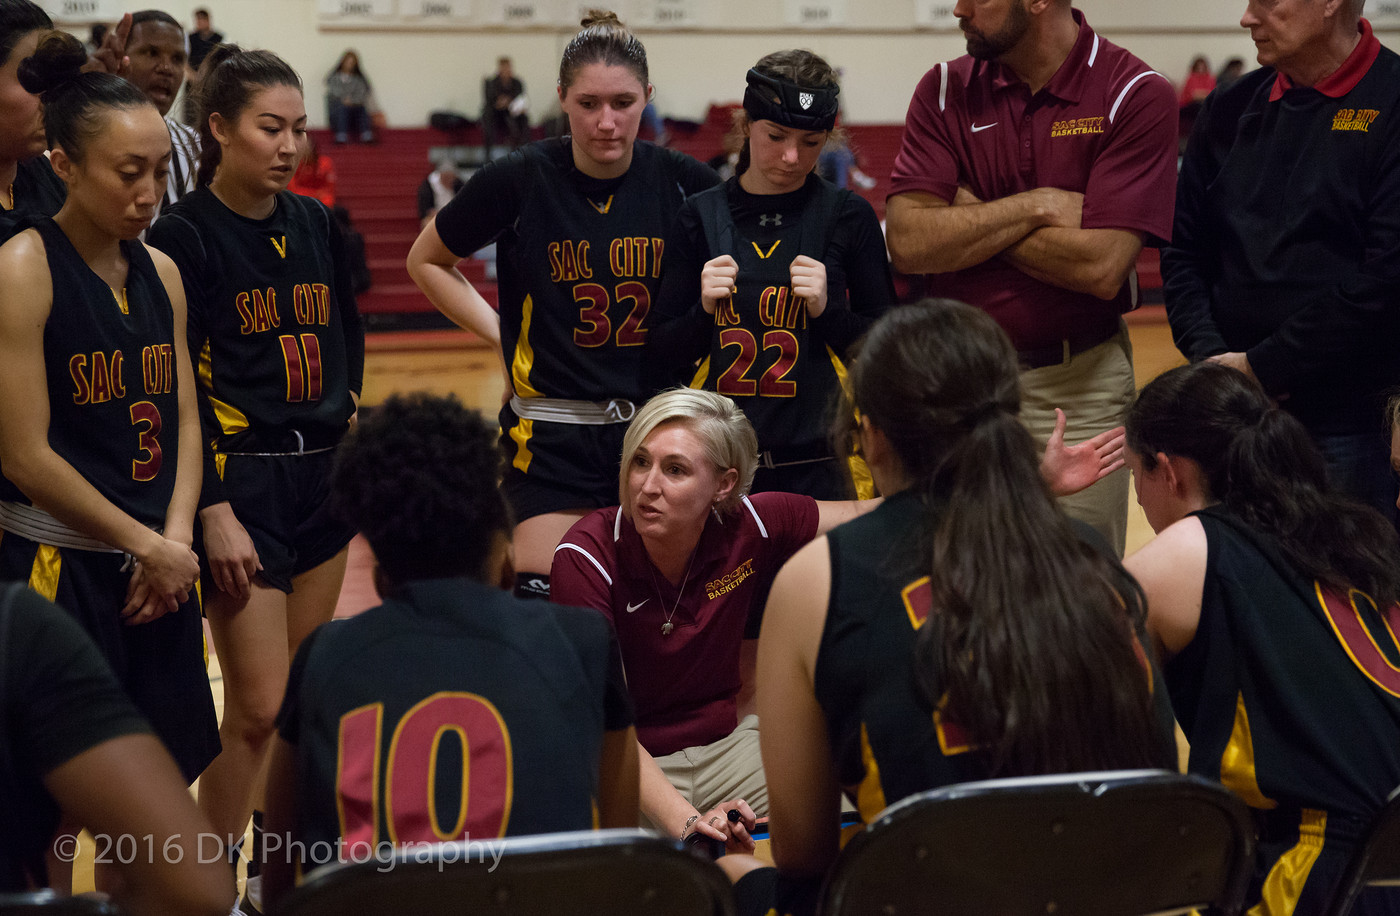 Sierra beats City to open up Conference play on Tuesday night